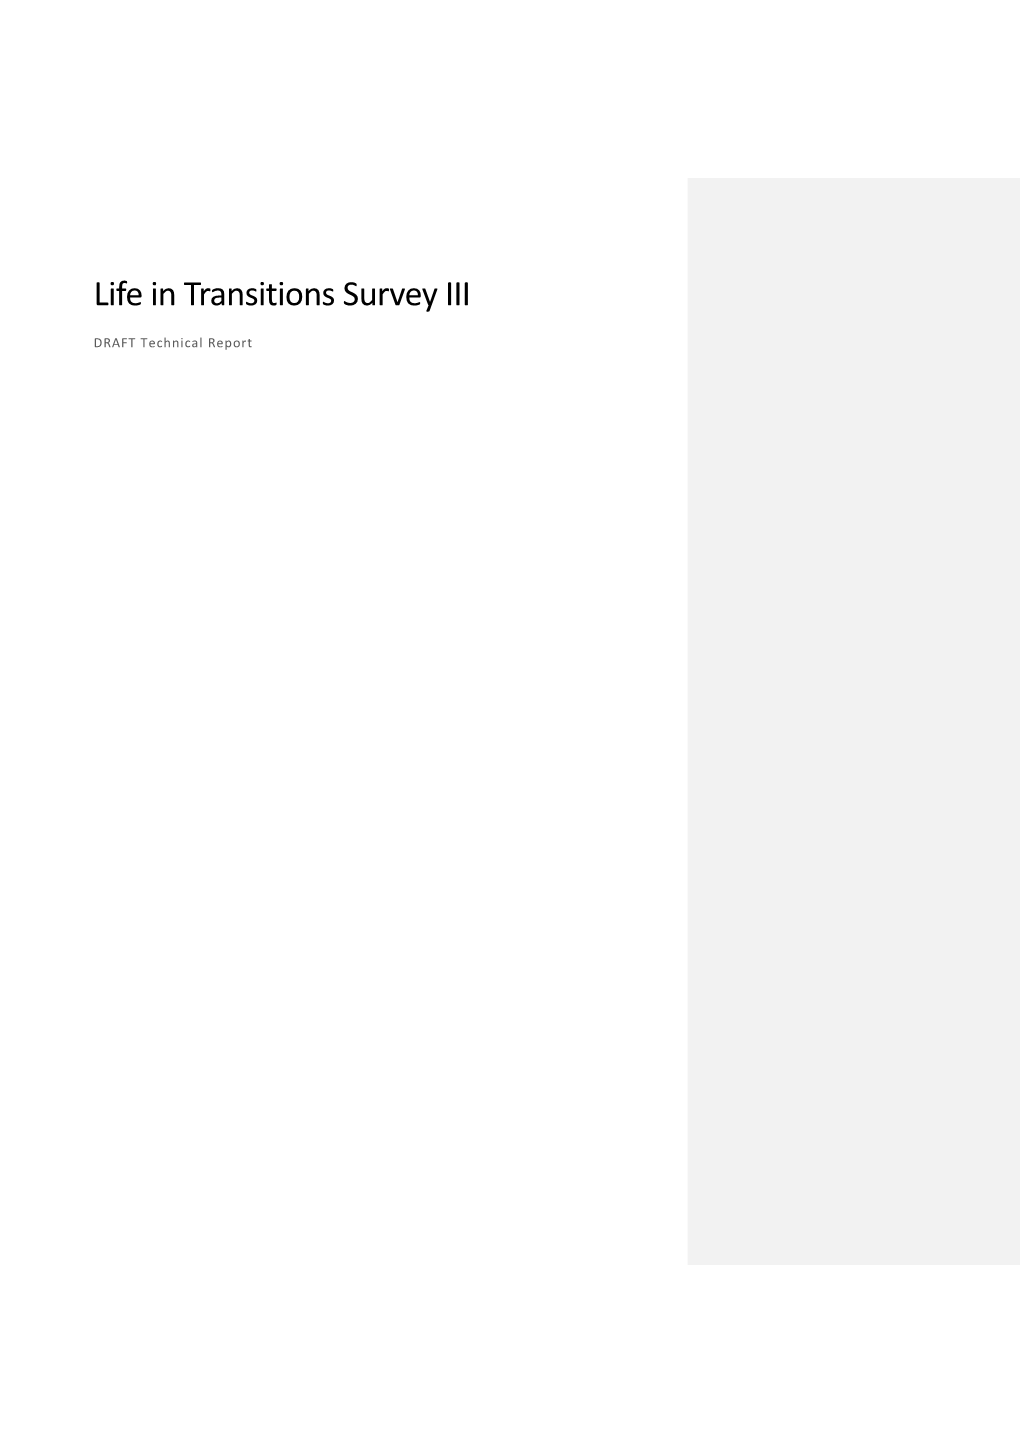 Life in Transitions Survey III